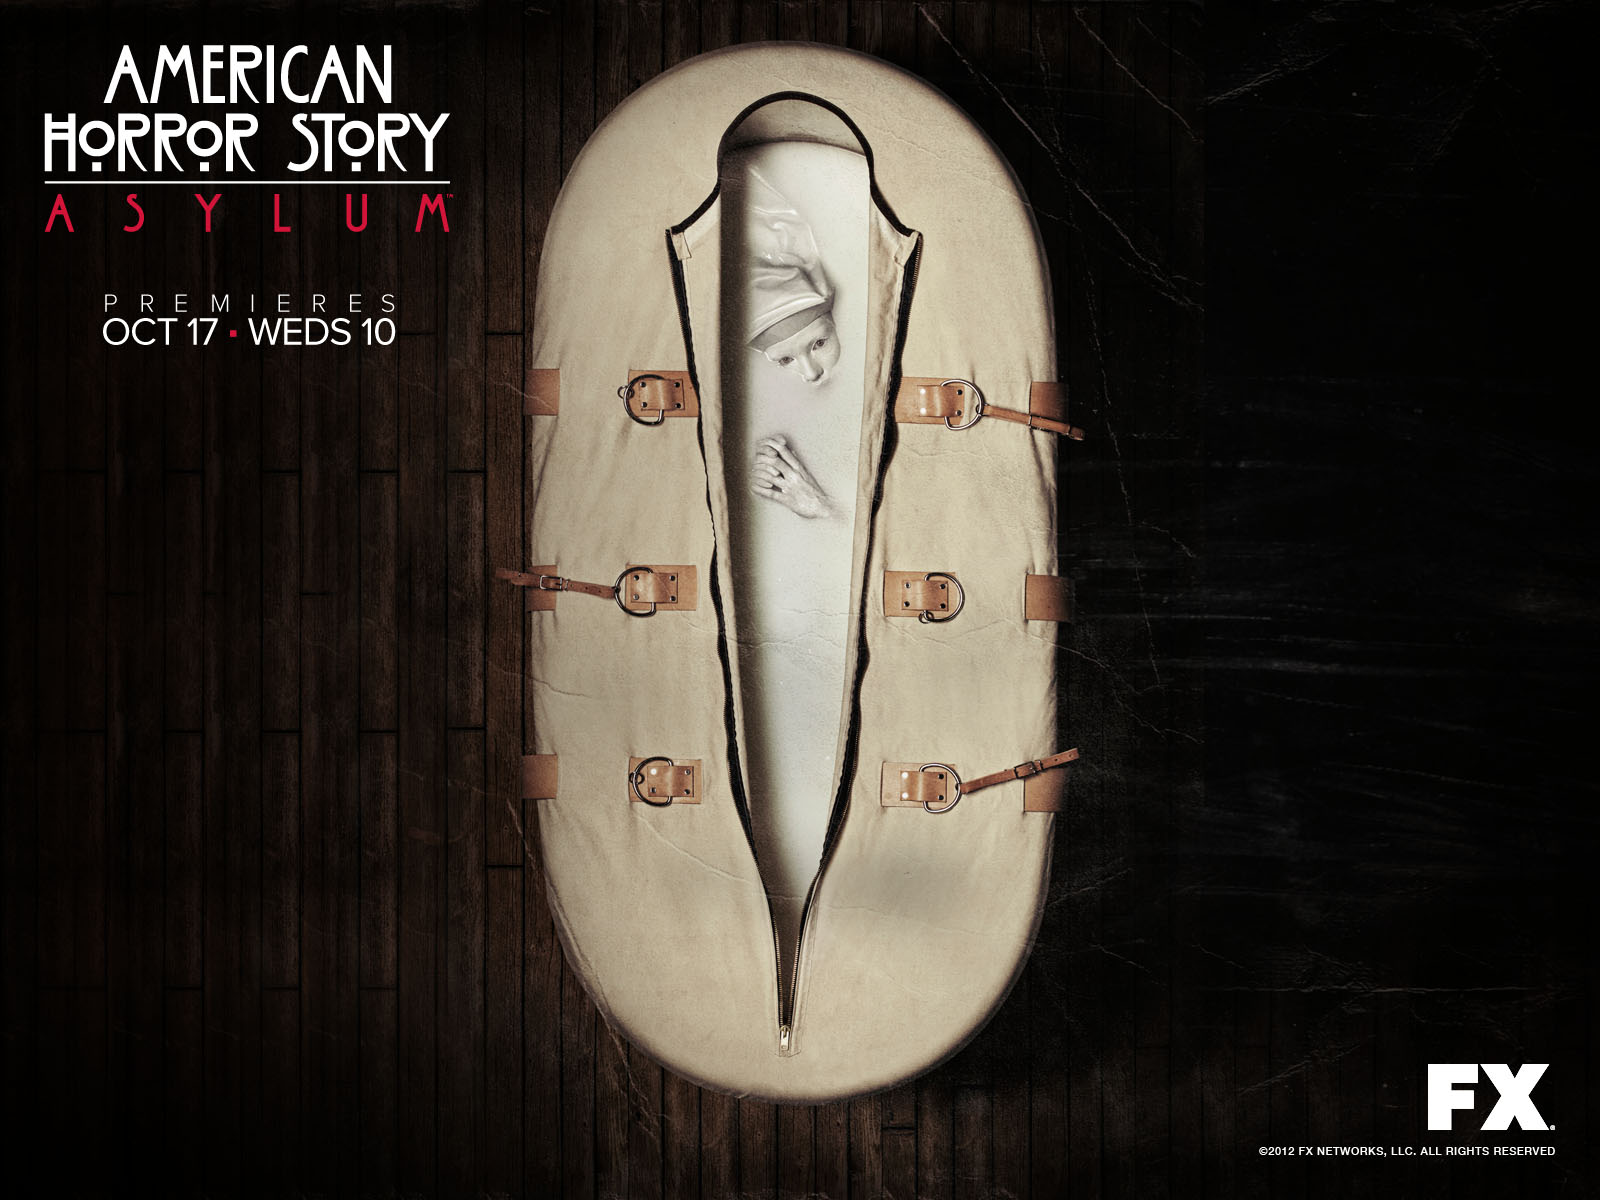 Wallpaper American Horror Story Asylum Geekeries Back To The